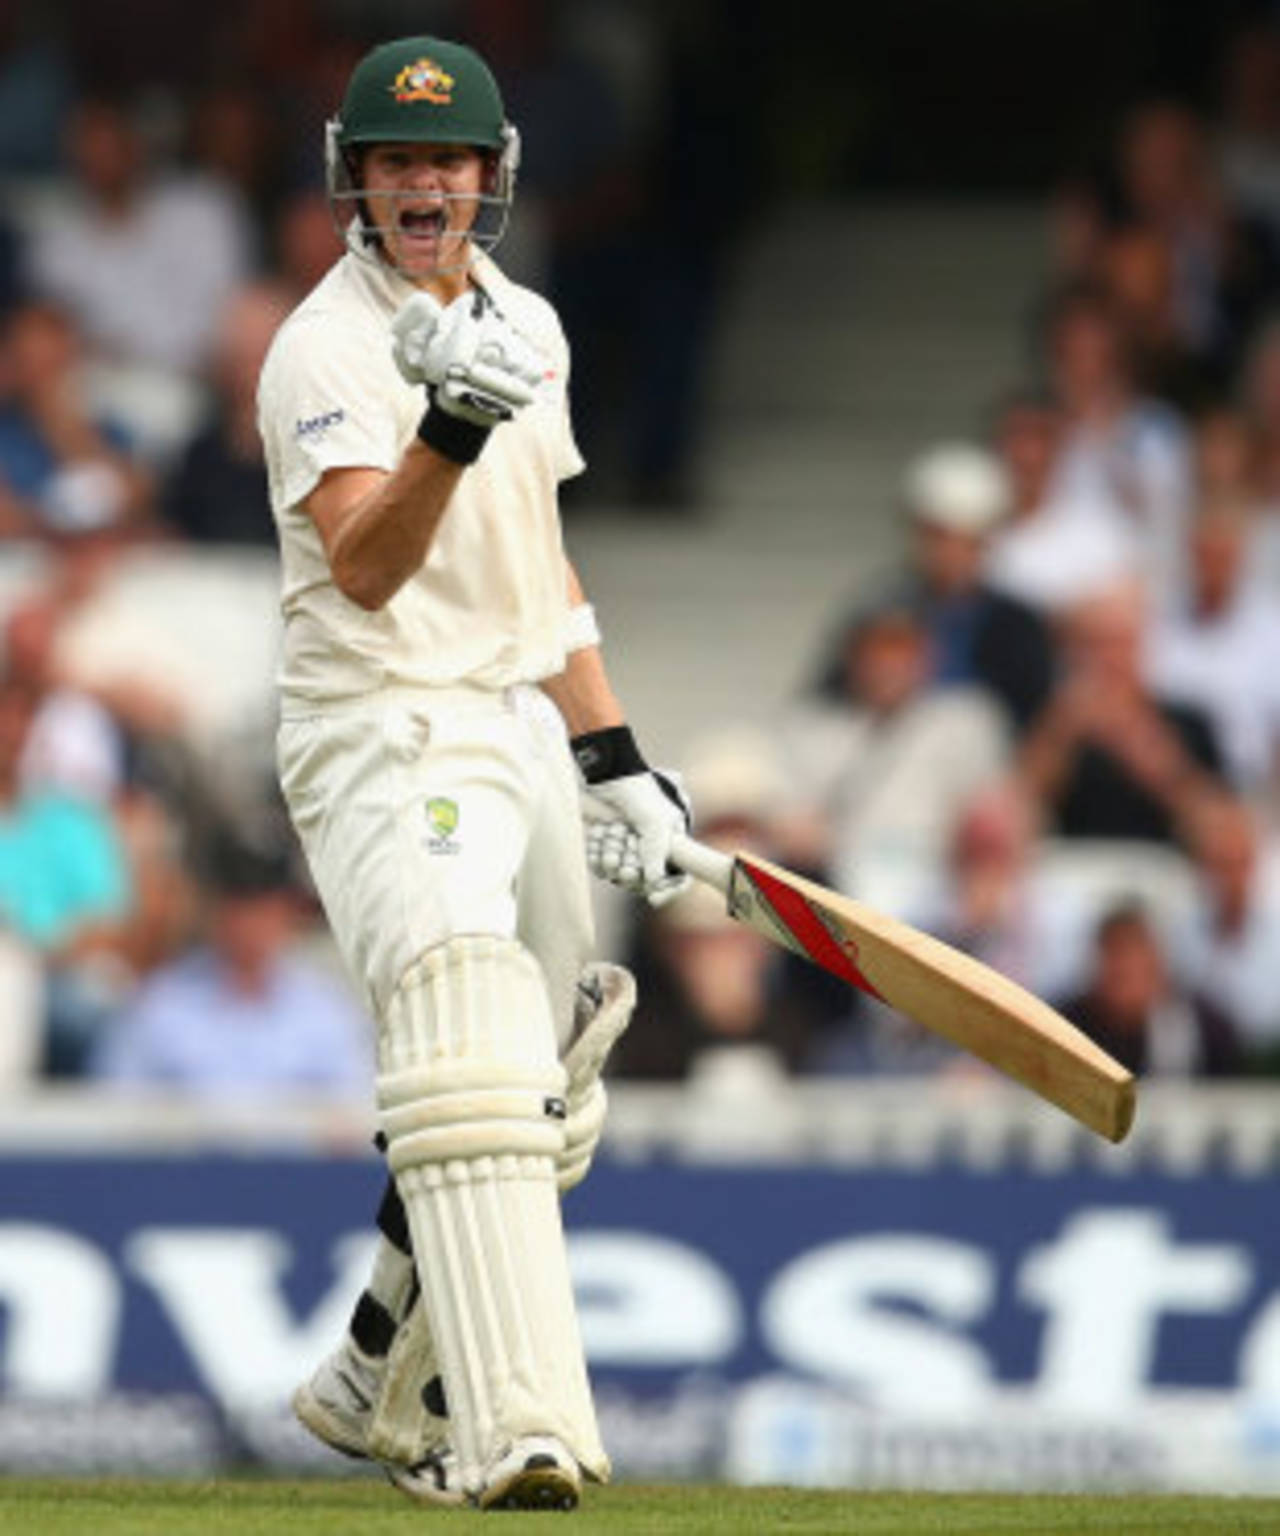 Steven Smith was delighted to reach his first Test hundred, England v Australia, 5th Investec Test, The Oval, 2nd day, August 22, 2013